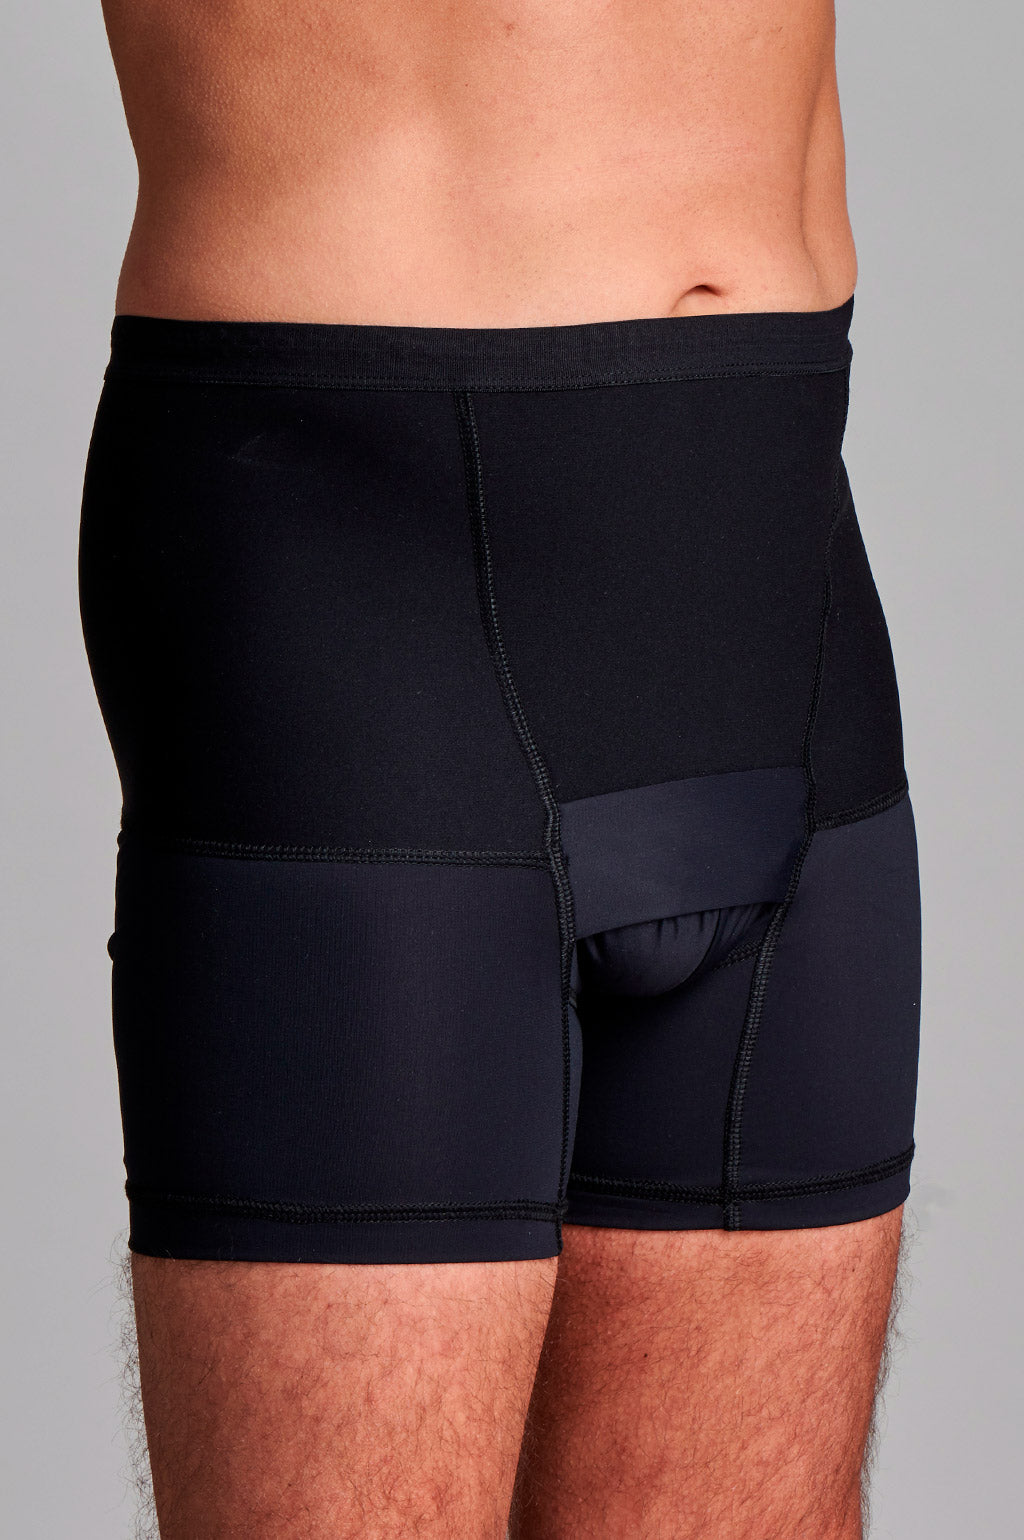 Mens Hernia Low Waist Support Girdle With Legs In Black - Bespoke – CUI ...